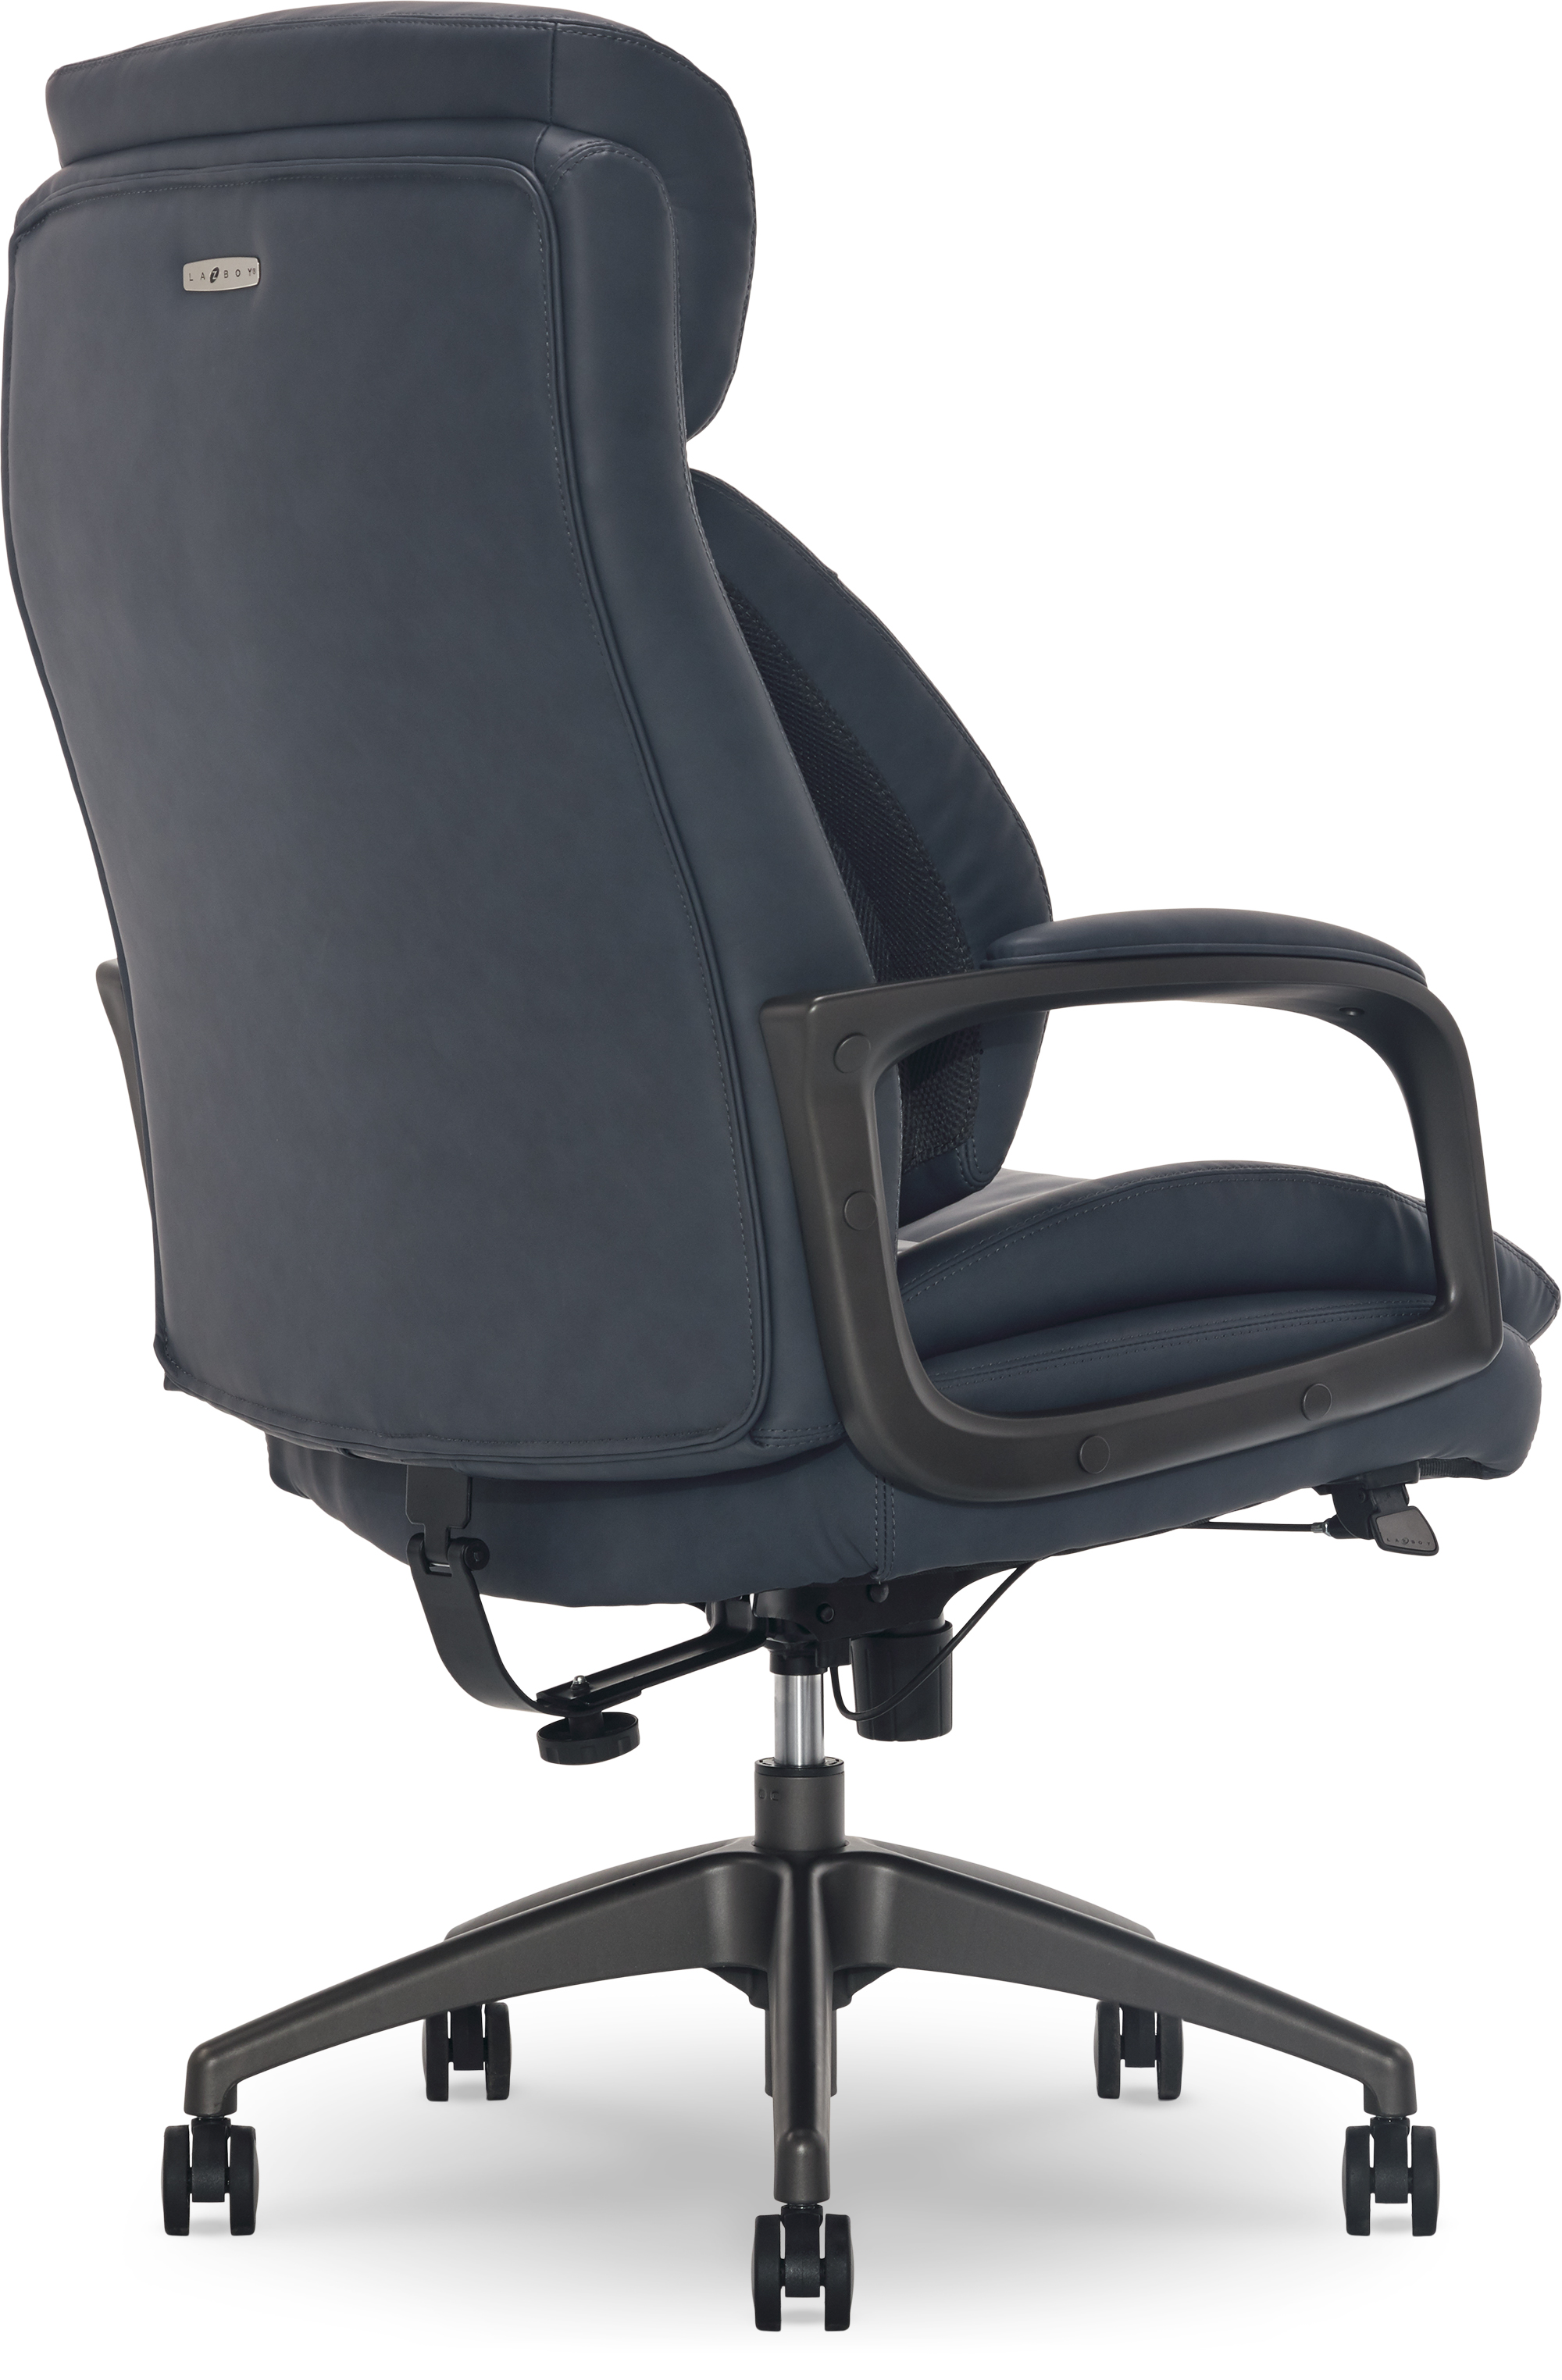 La-Z-Boy Calix Big and Tall Executive Chair with TrueWellness Technology  Office Chair Slate 51904-SLT - Best Buy